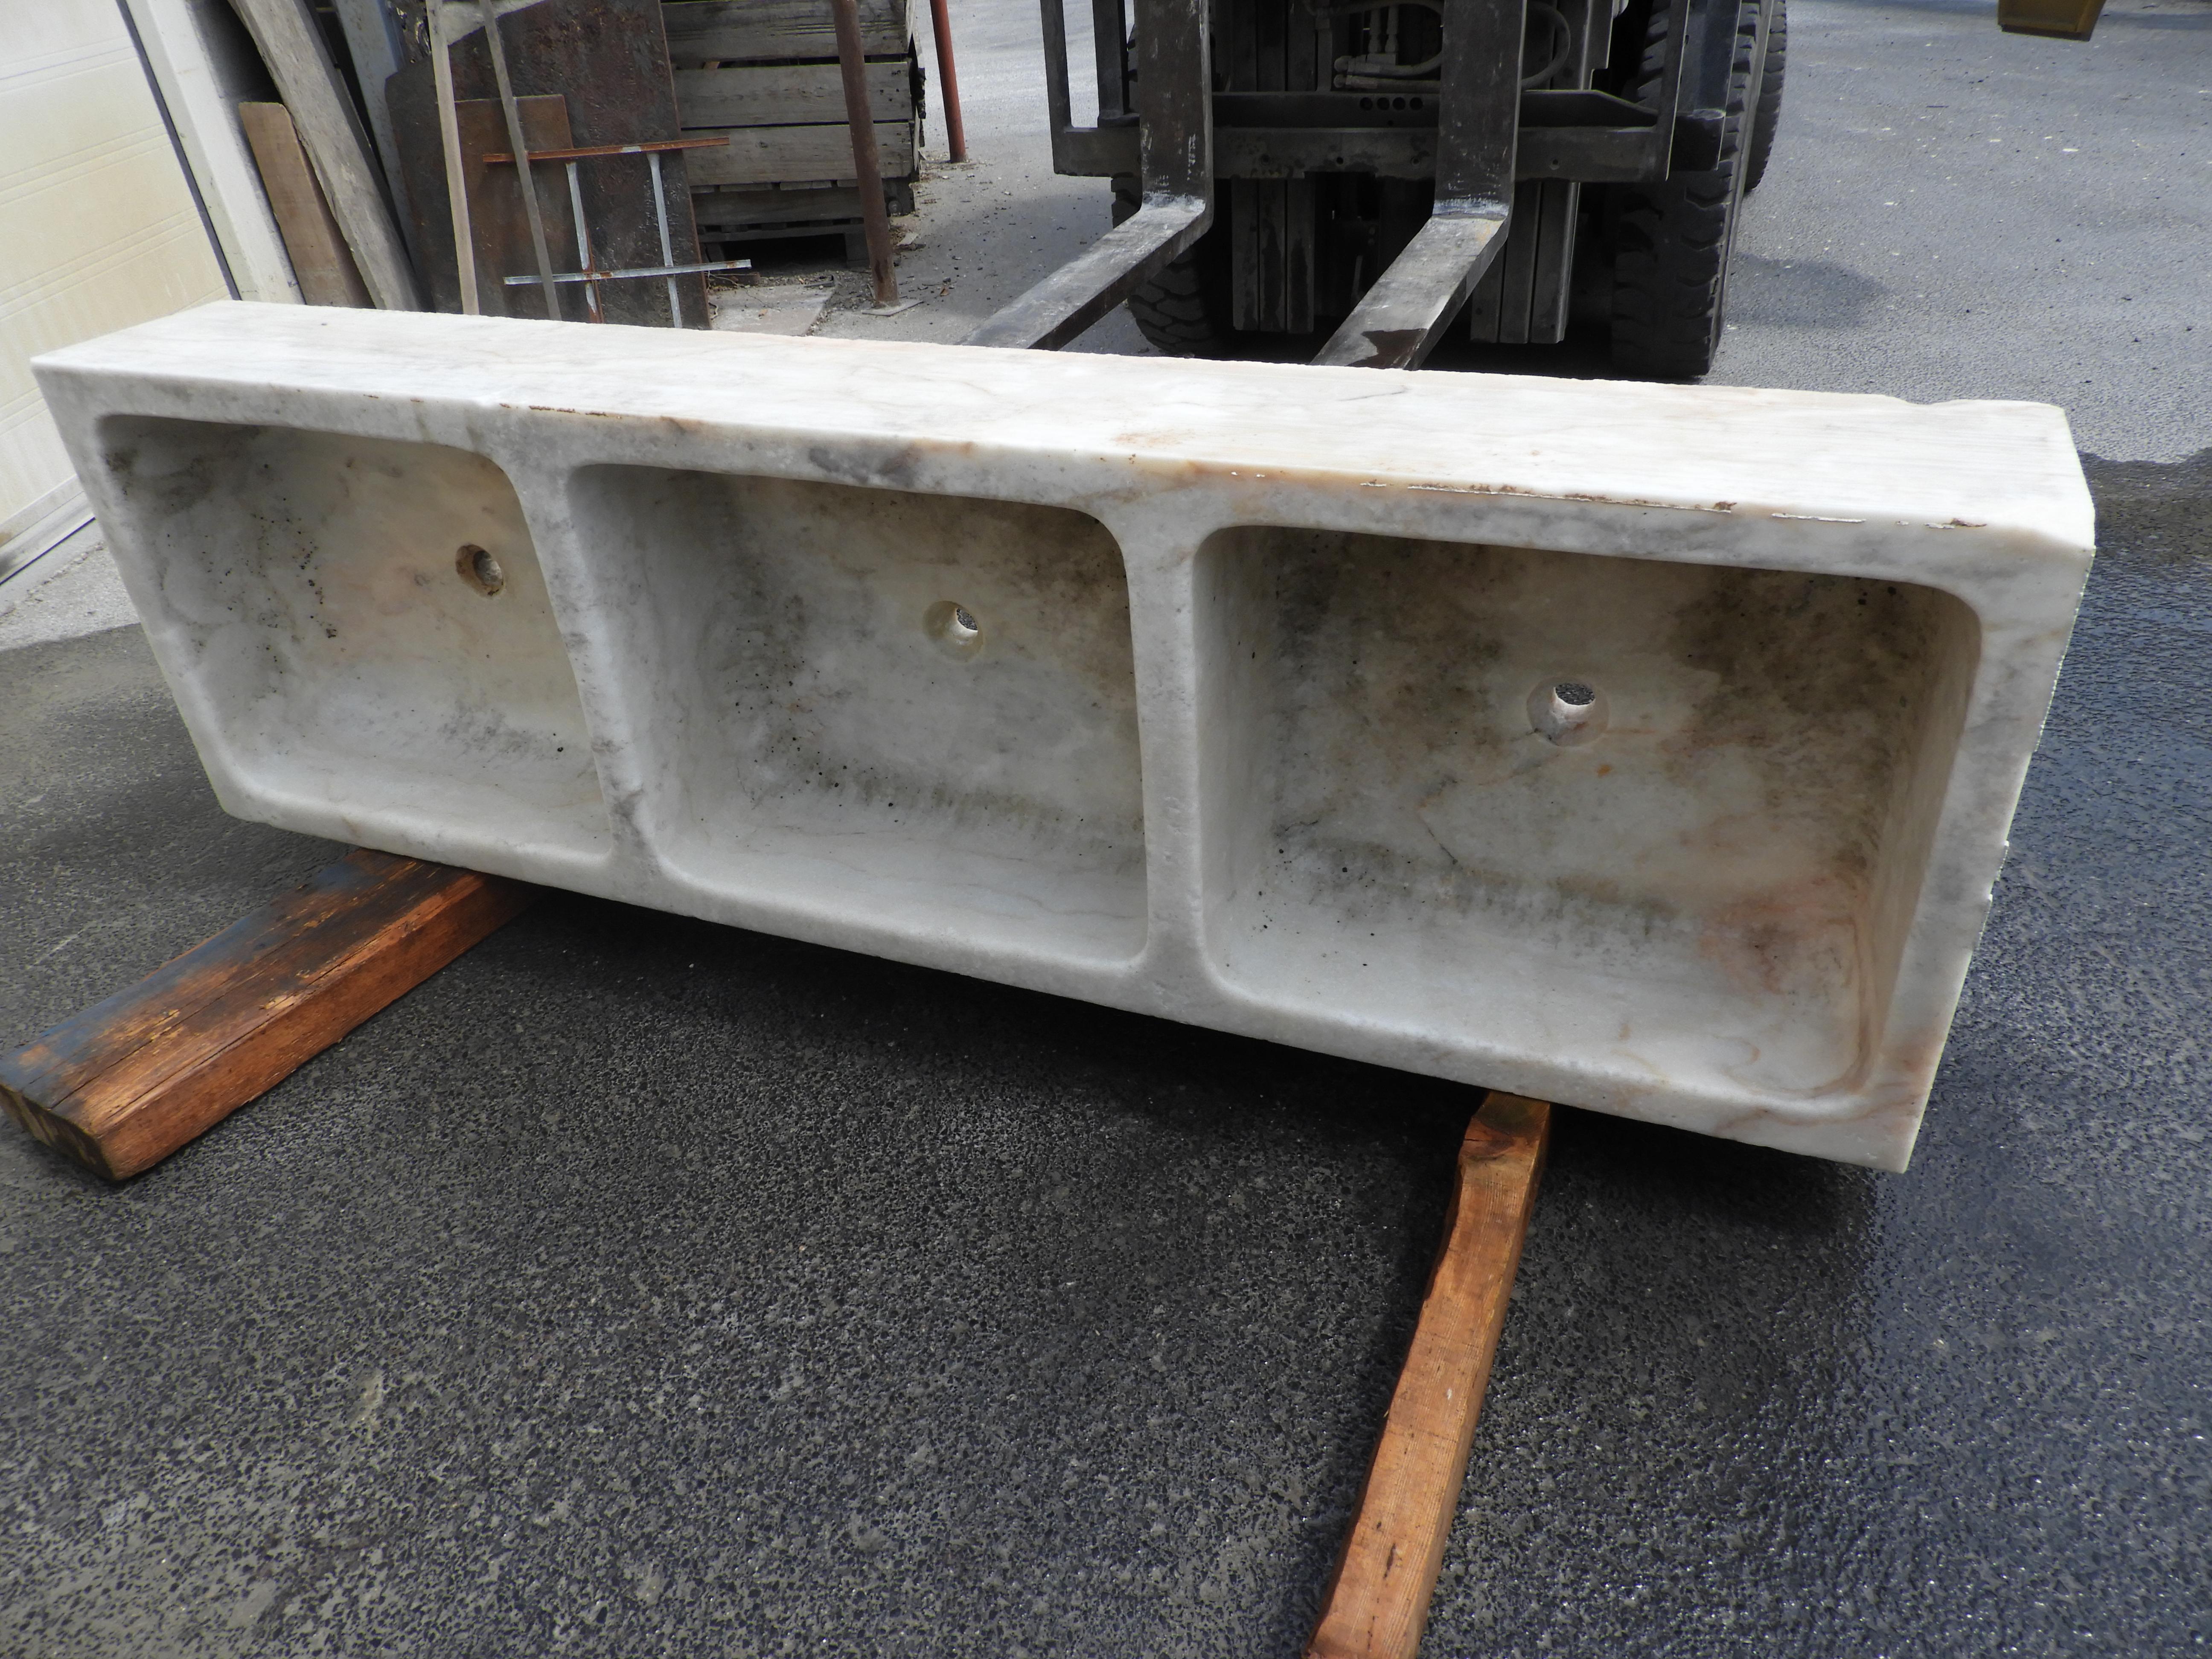 19th century Spanish marble sink in three compartments, white marble with a little grey and pink.